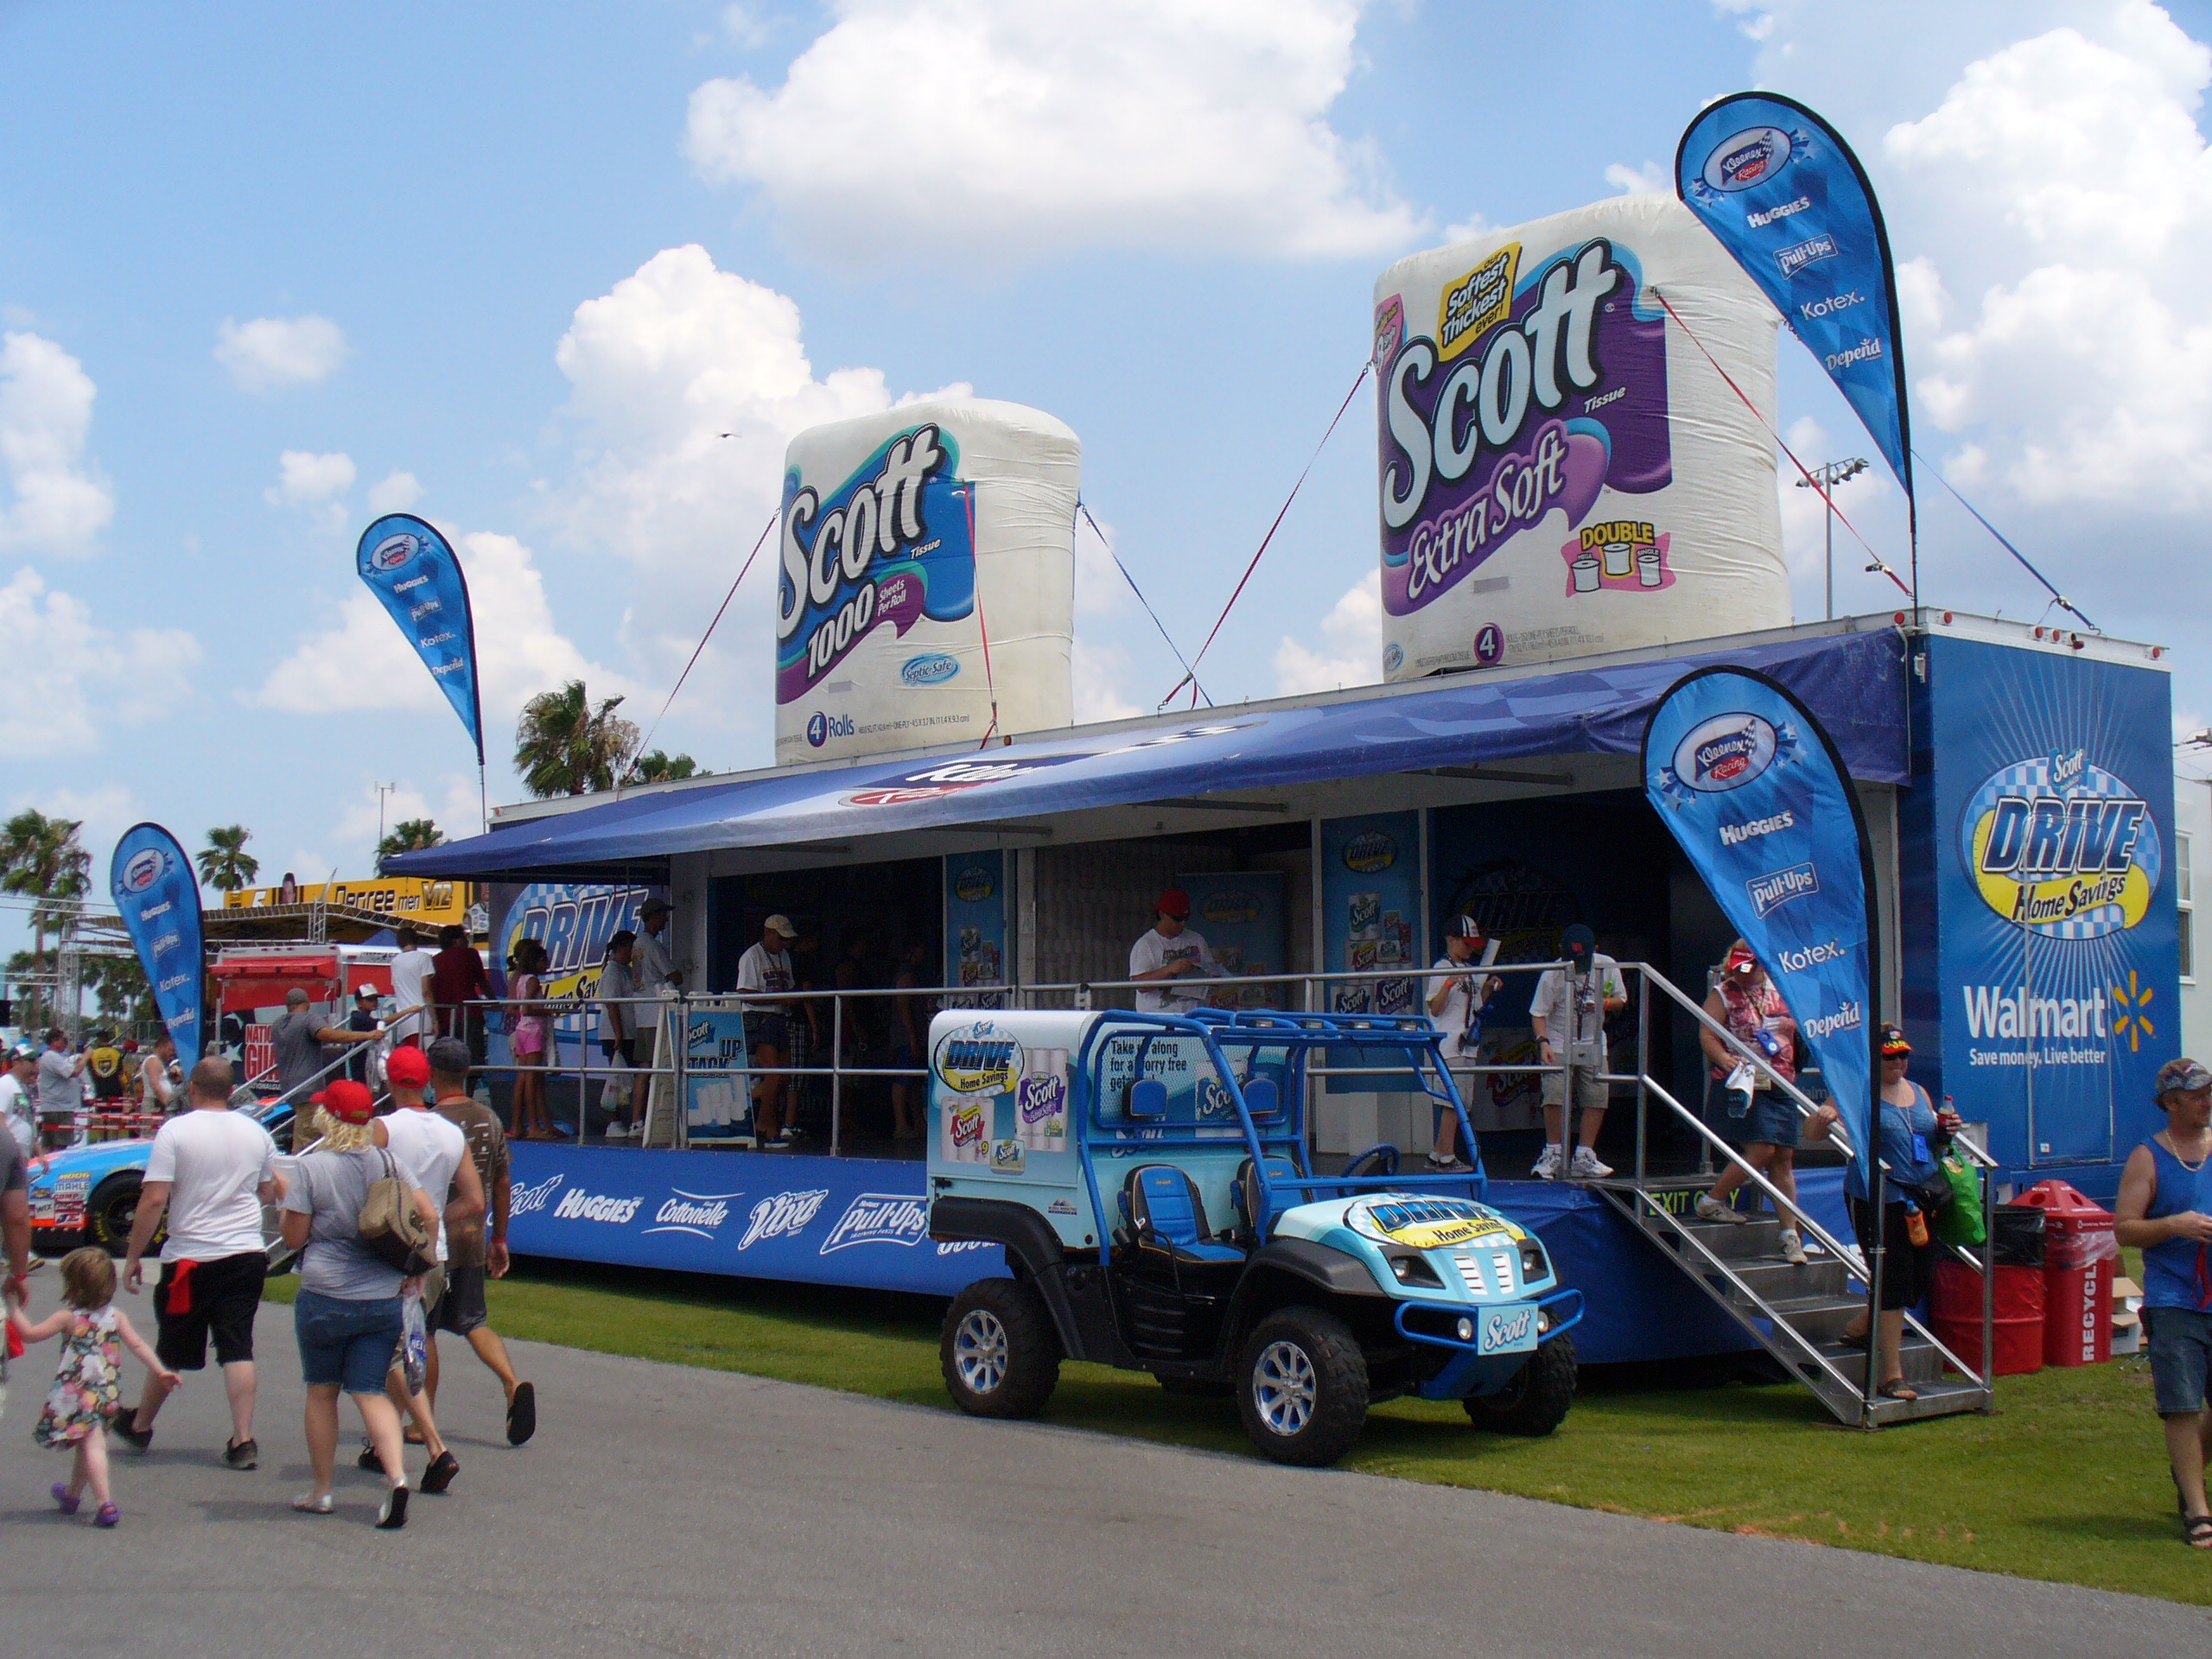 Kimberly Clark Scott toilet paper display on a mobile trailer